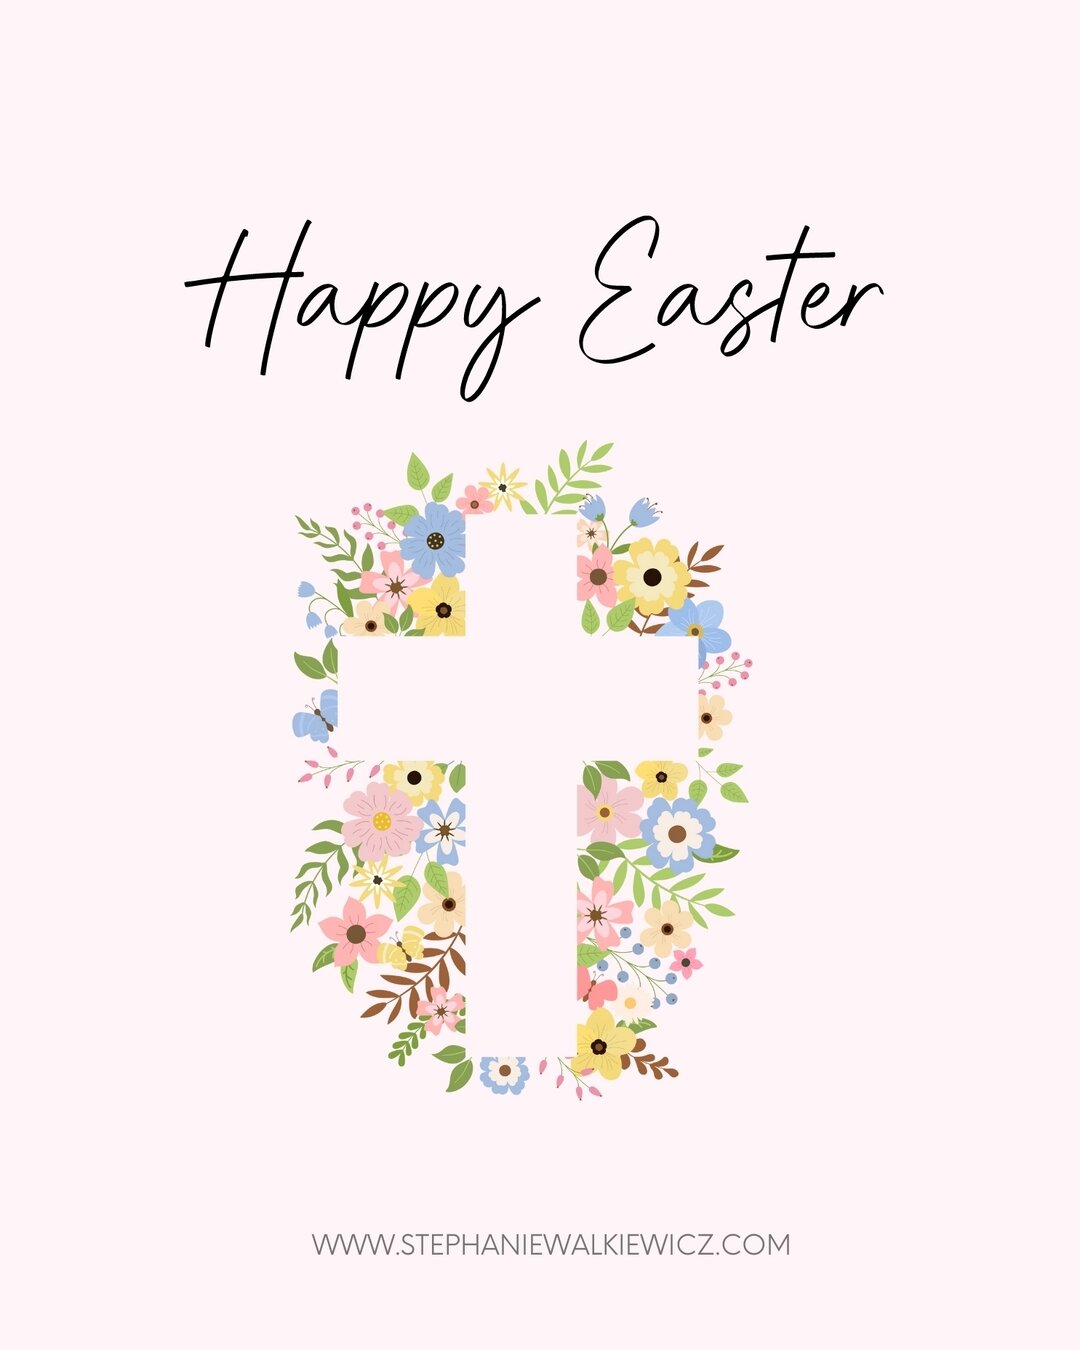 Wishing you and your peeps 🐤 a happy and joyous Easter!